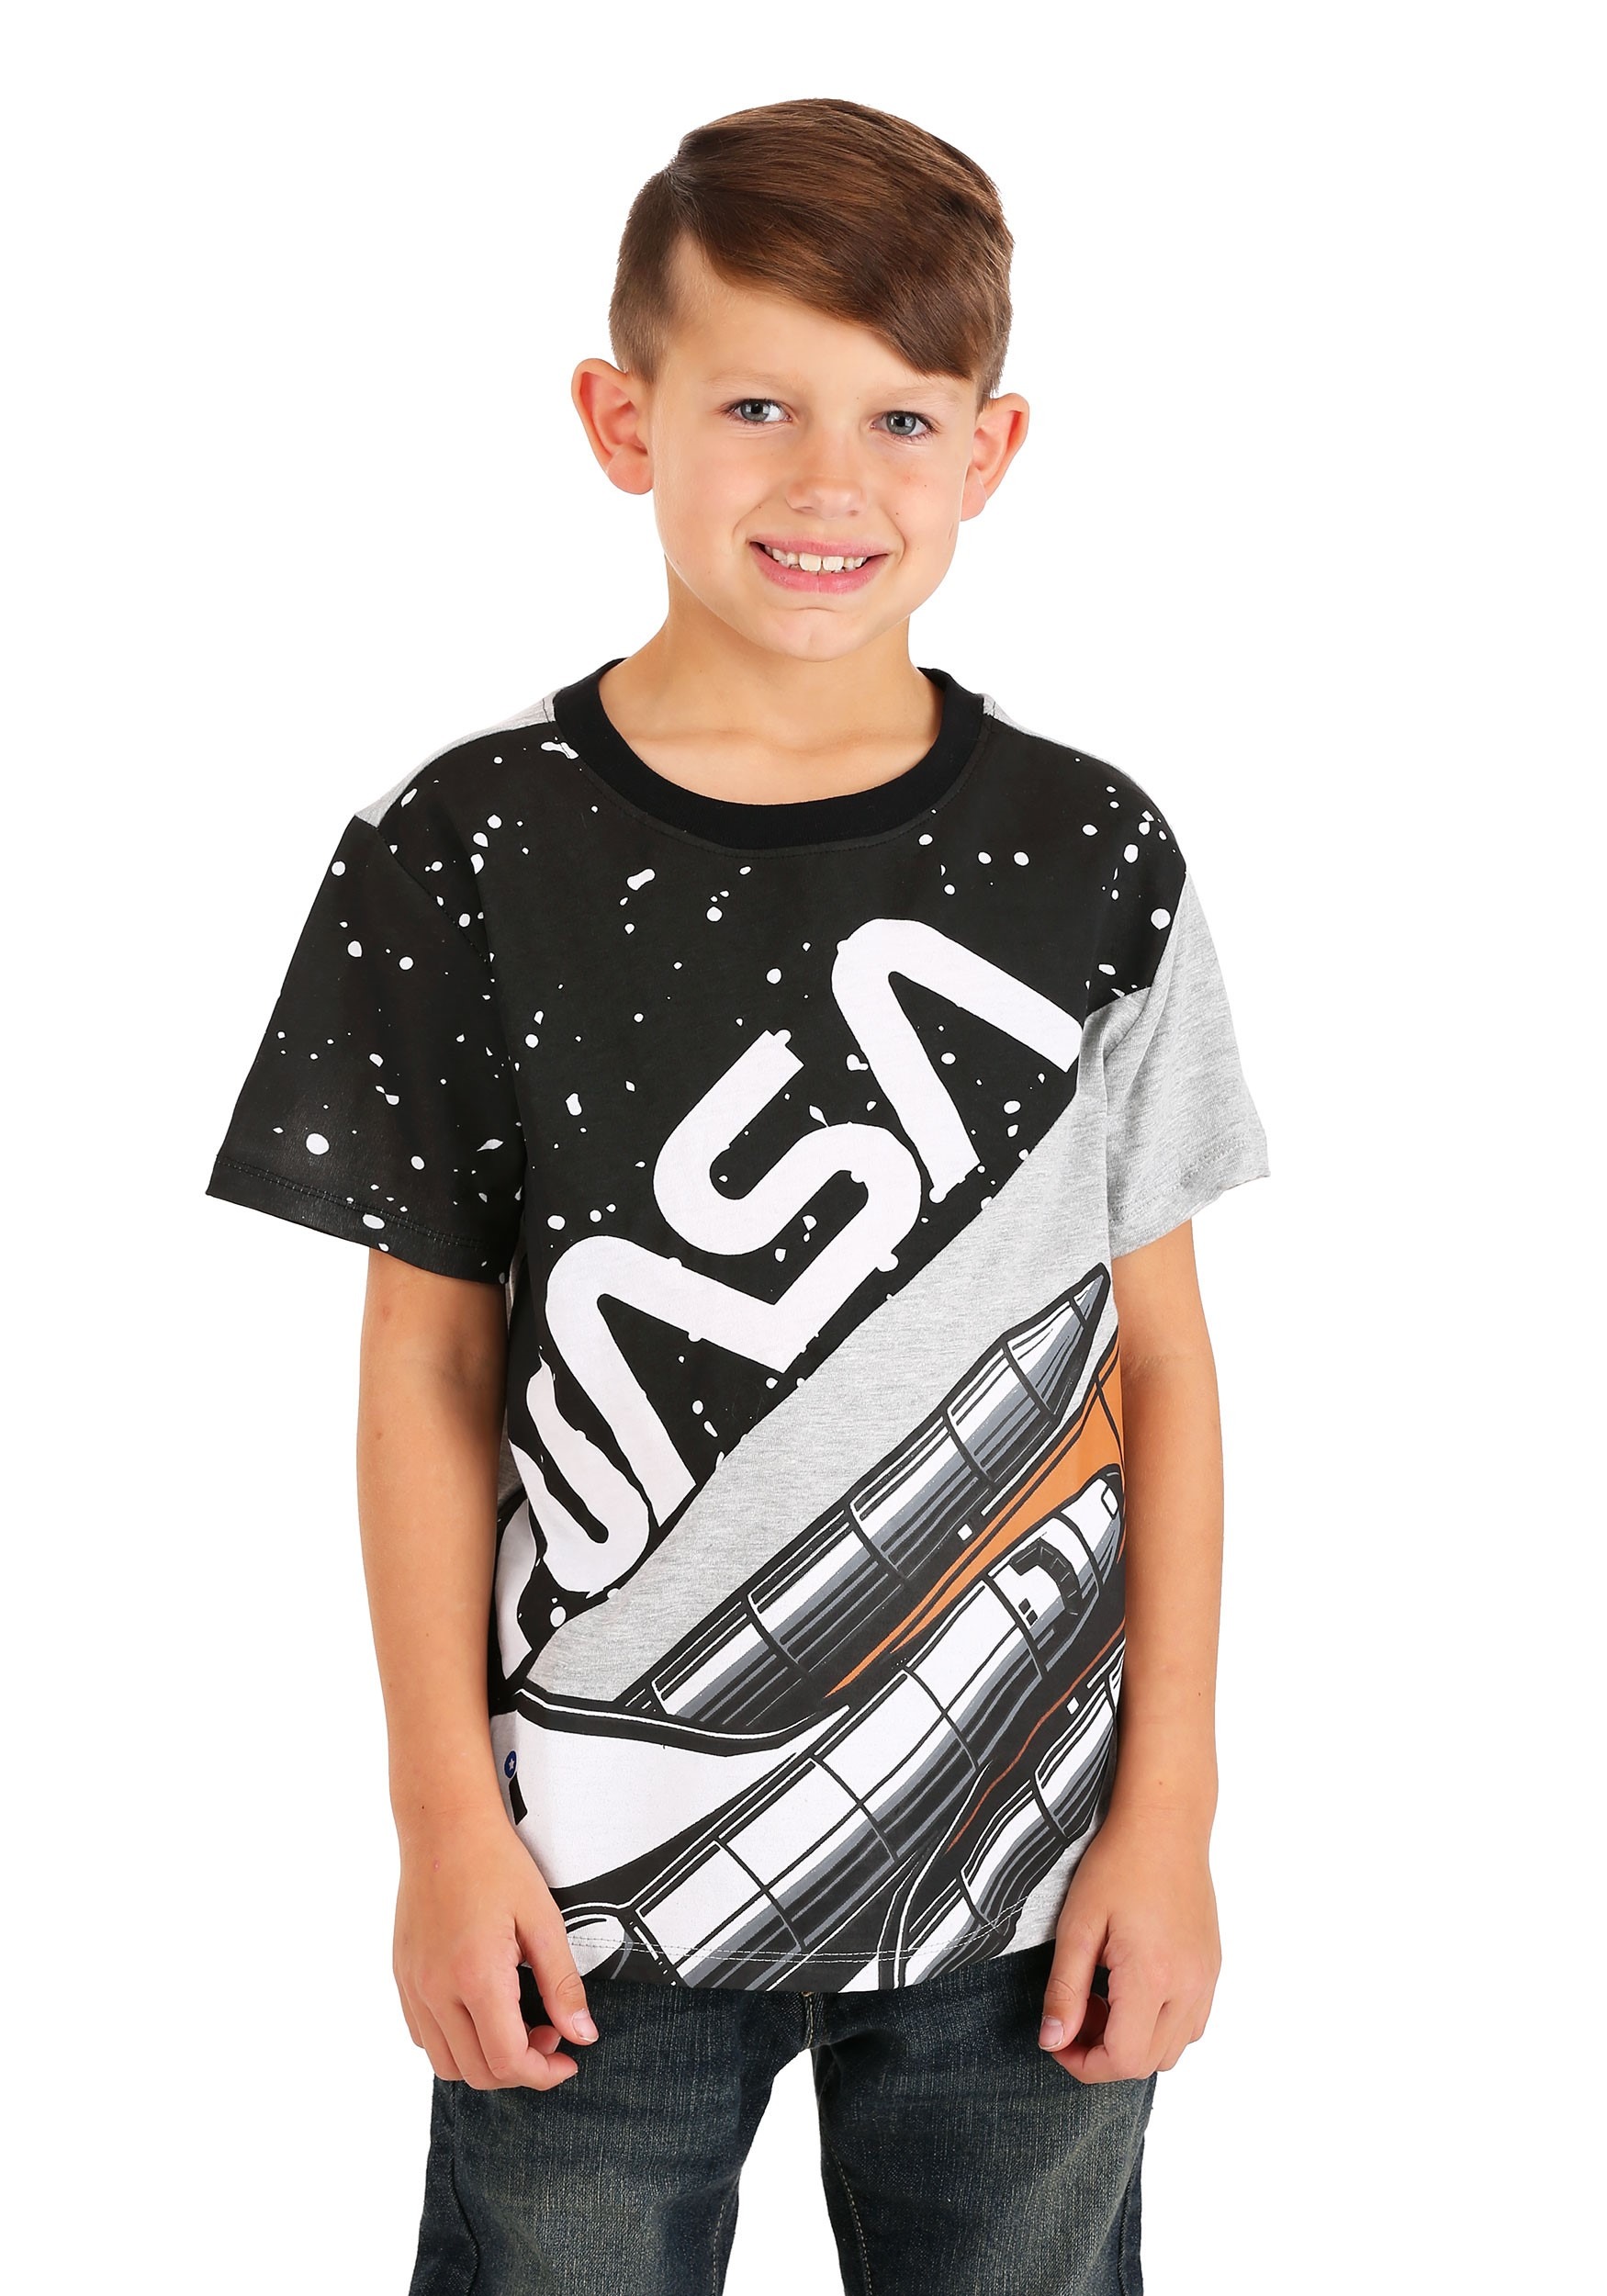 NASA Cut & Sew Patterned T-Shirt for Boys